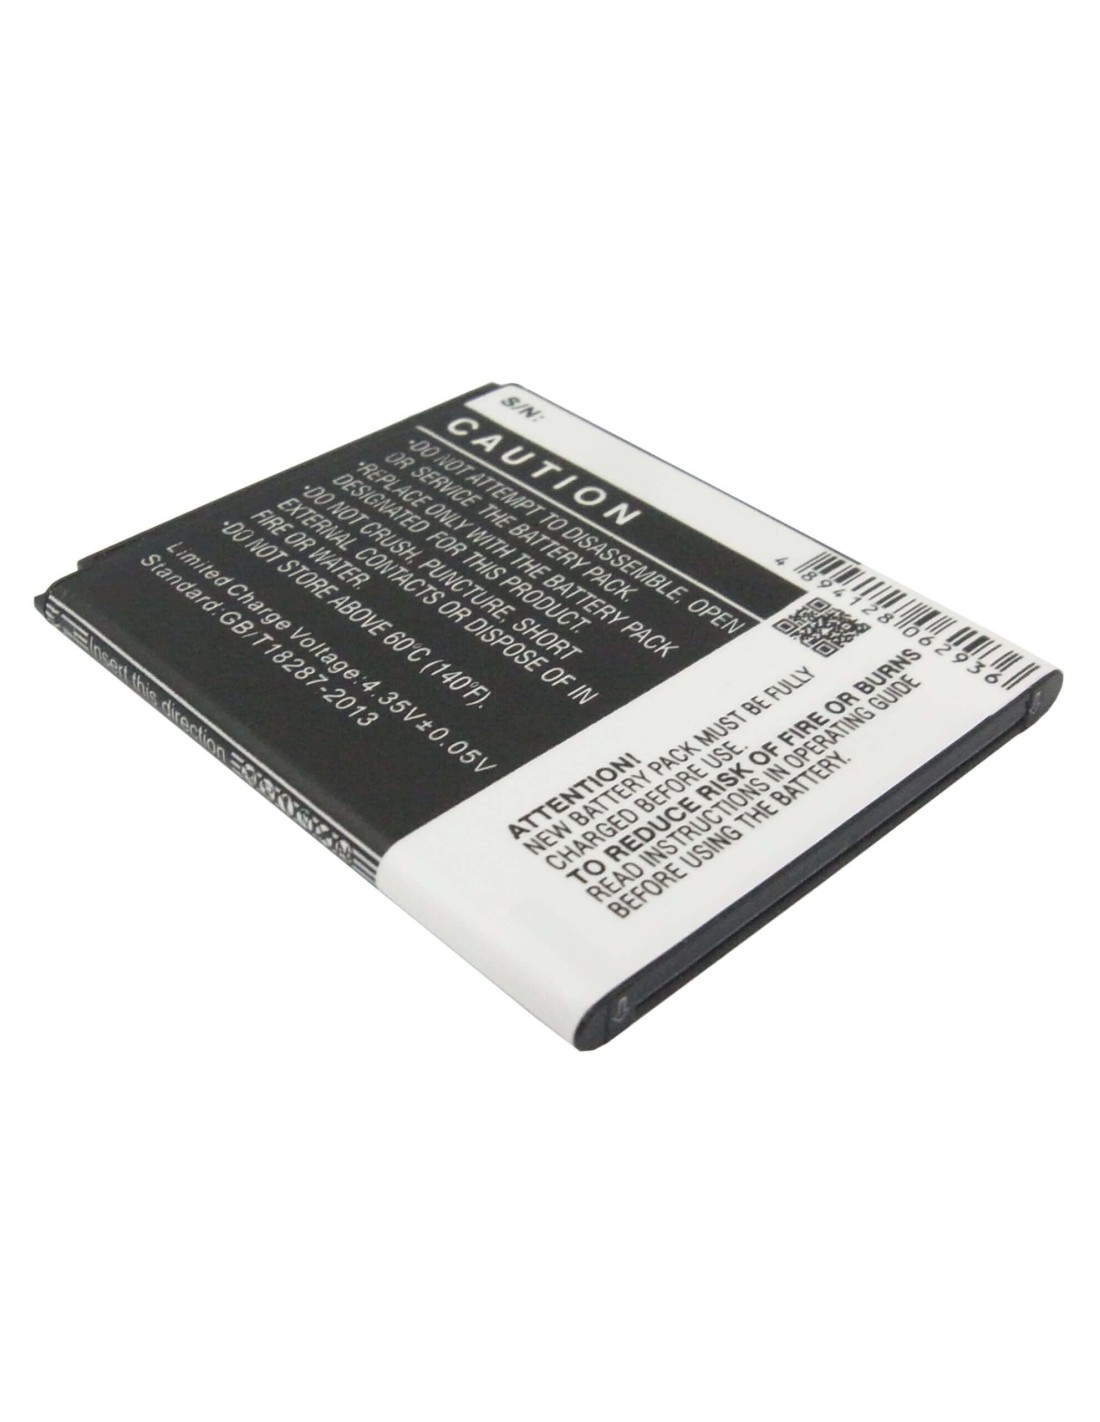 Battery for Samsung Galaxy Ace 2, GT-I8160, GT-I8160P 3.8V, 1500mAh - 5.70Wh